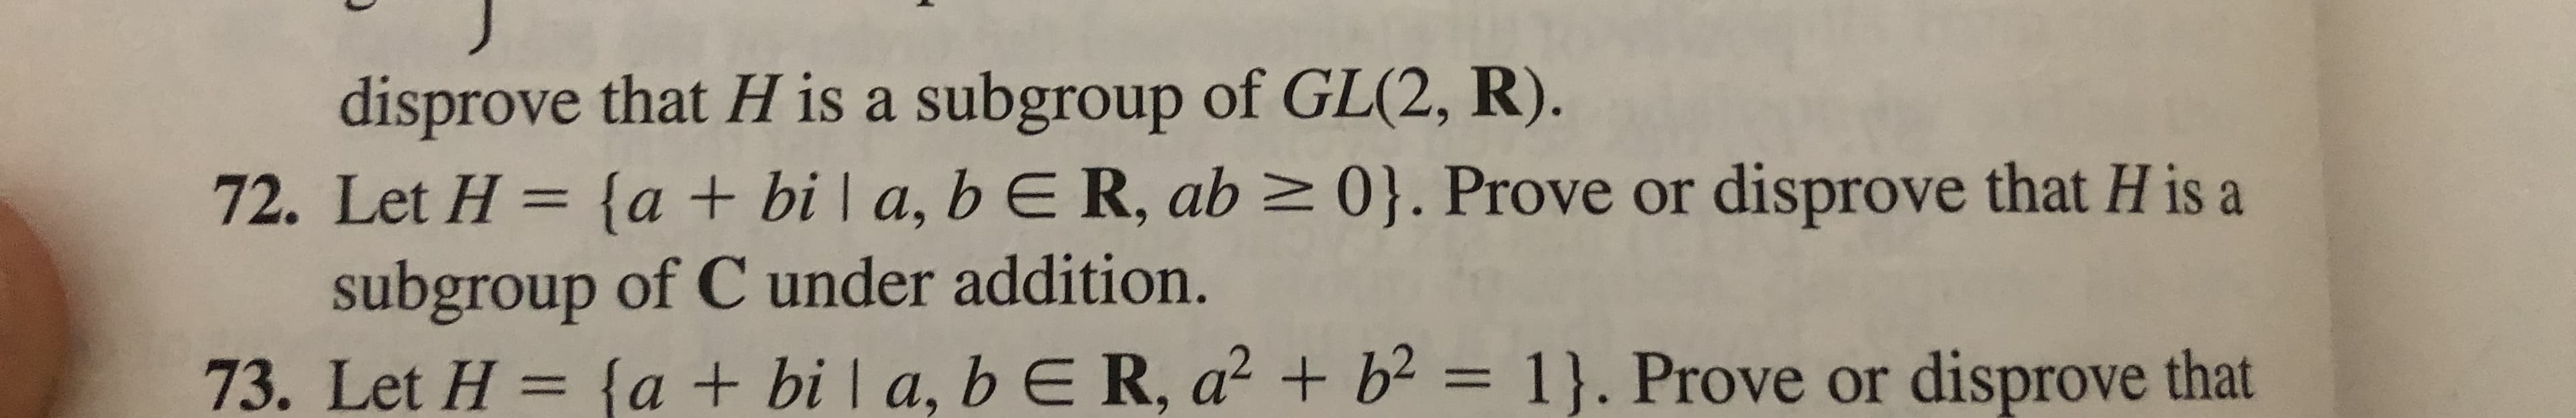 disprove that H is a subgroup of GL(2, R).
72. Let H {a + bi | a, b E R, ab 0}. Prove or disprove that H is a
subgroup of C under addition.
73. Let H= {a + bi a, b E R, a2 b= 1}. Prove or disprove that
